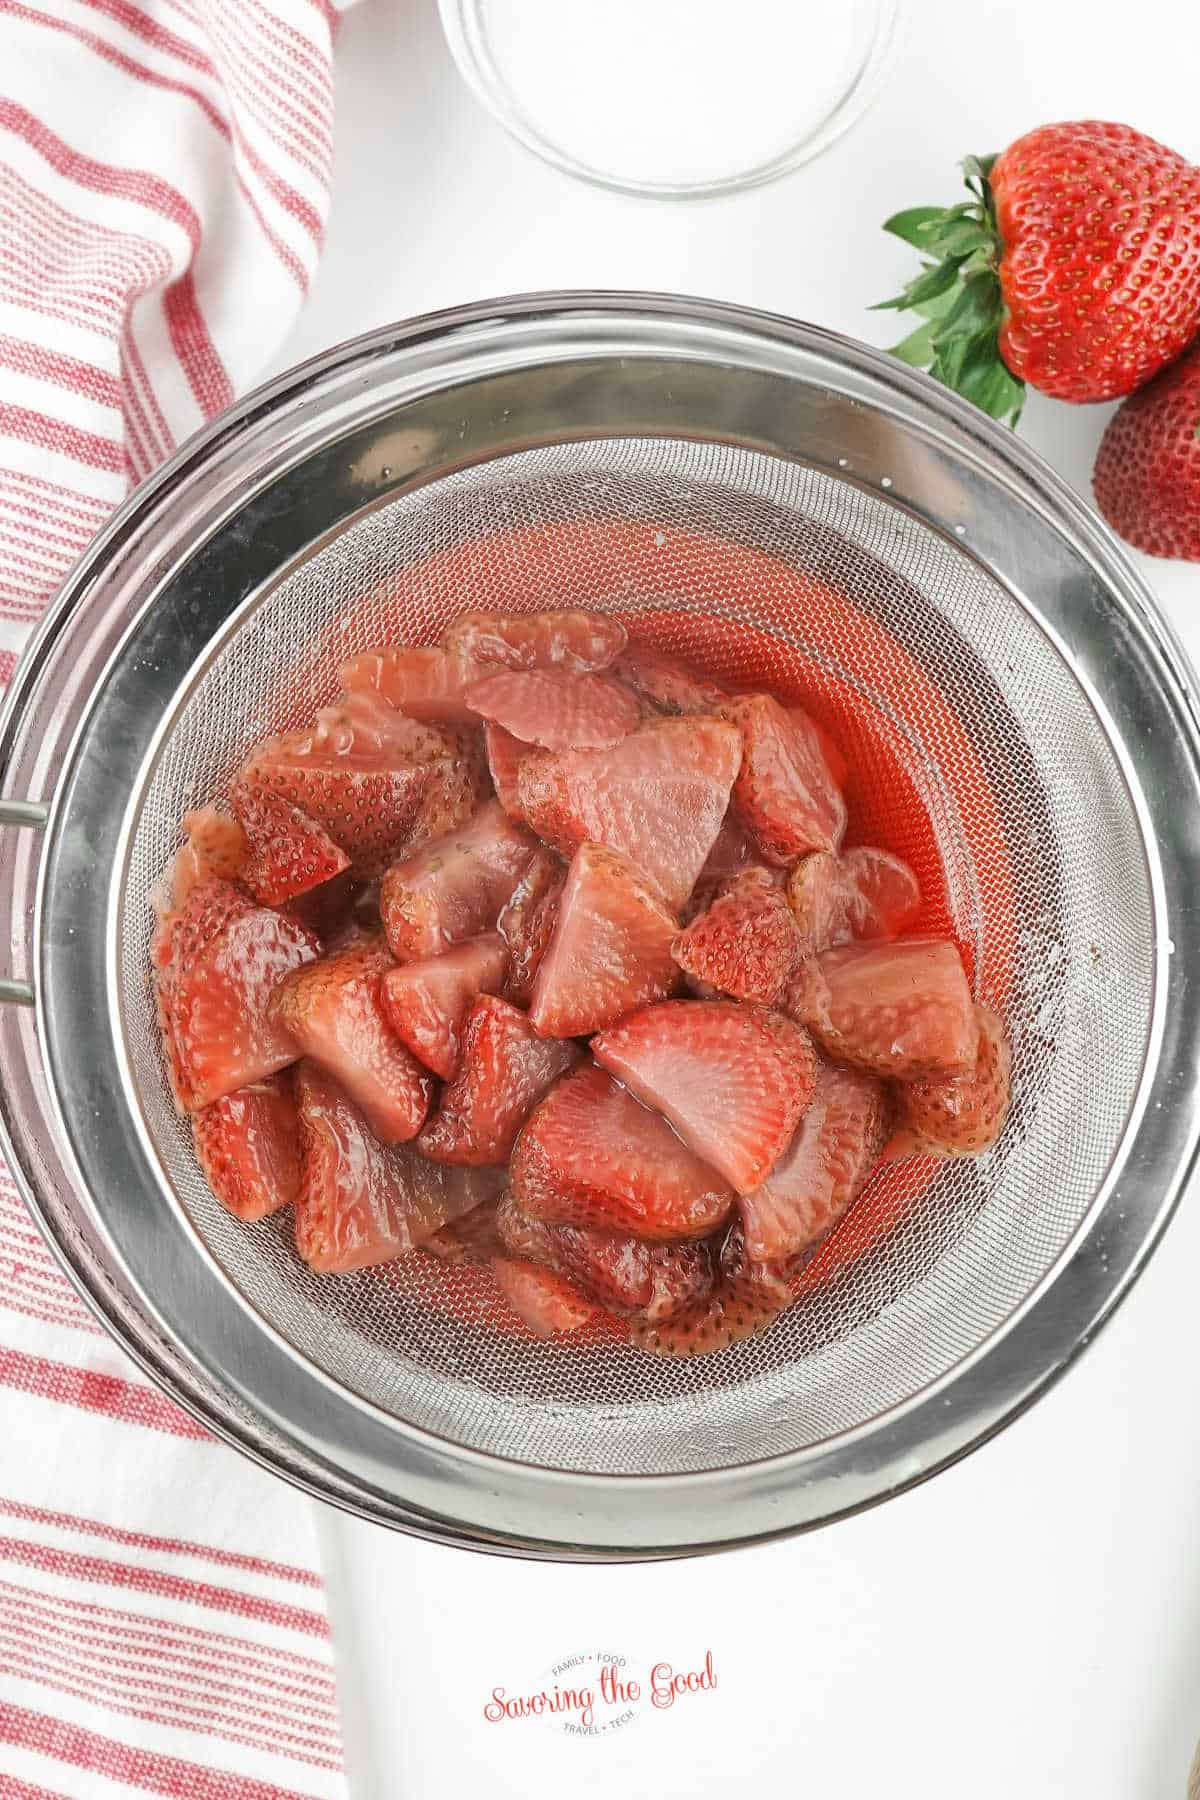 mashed, strained, cooked strawberries in a strainer.